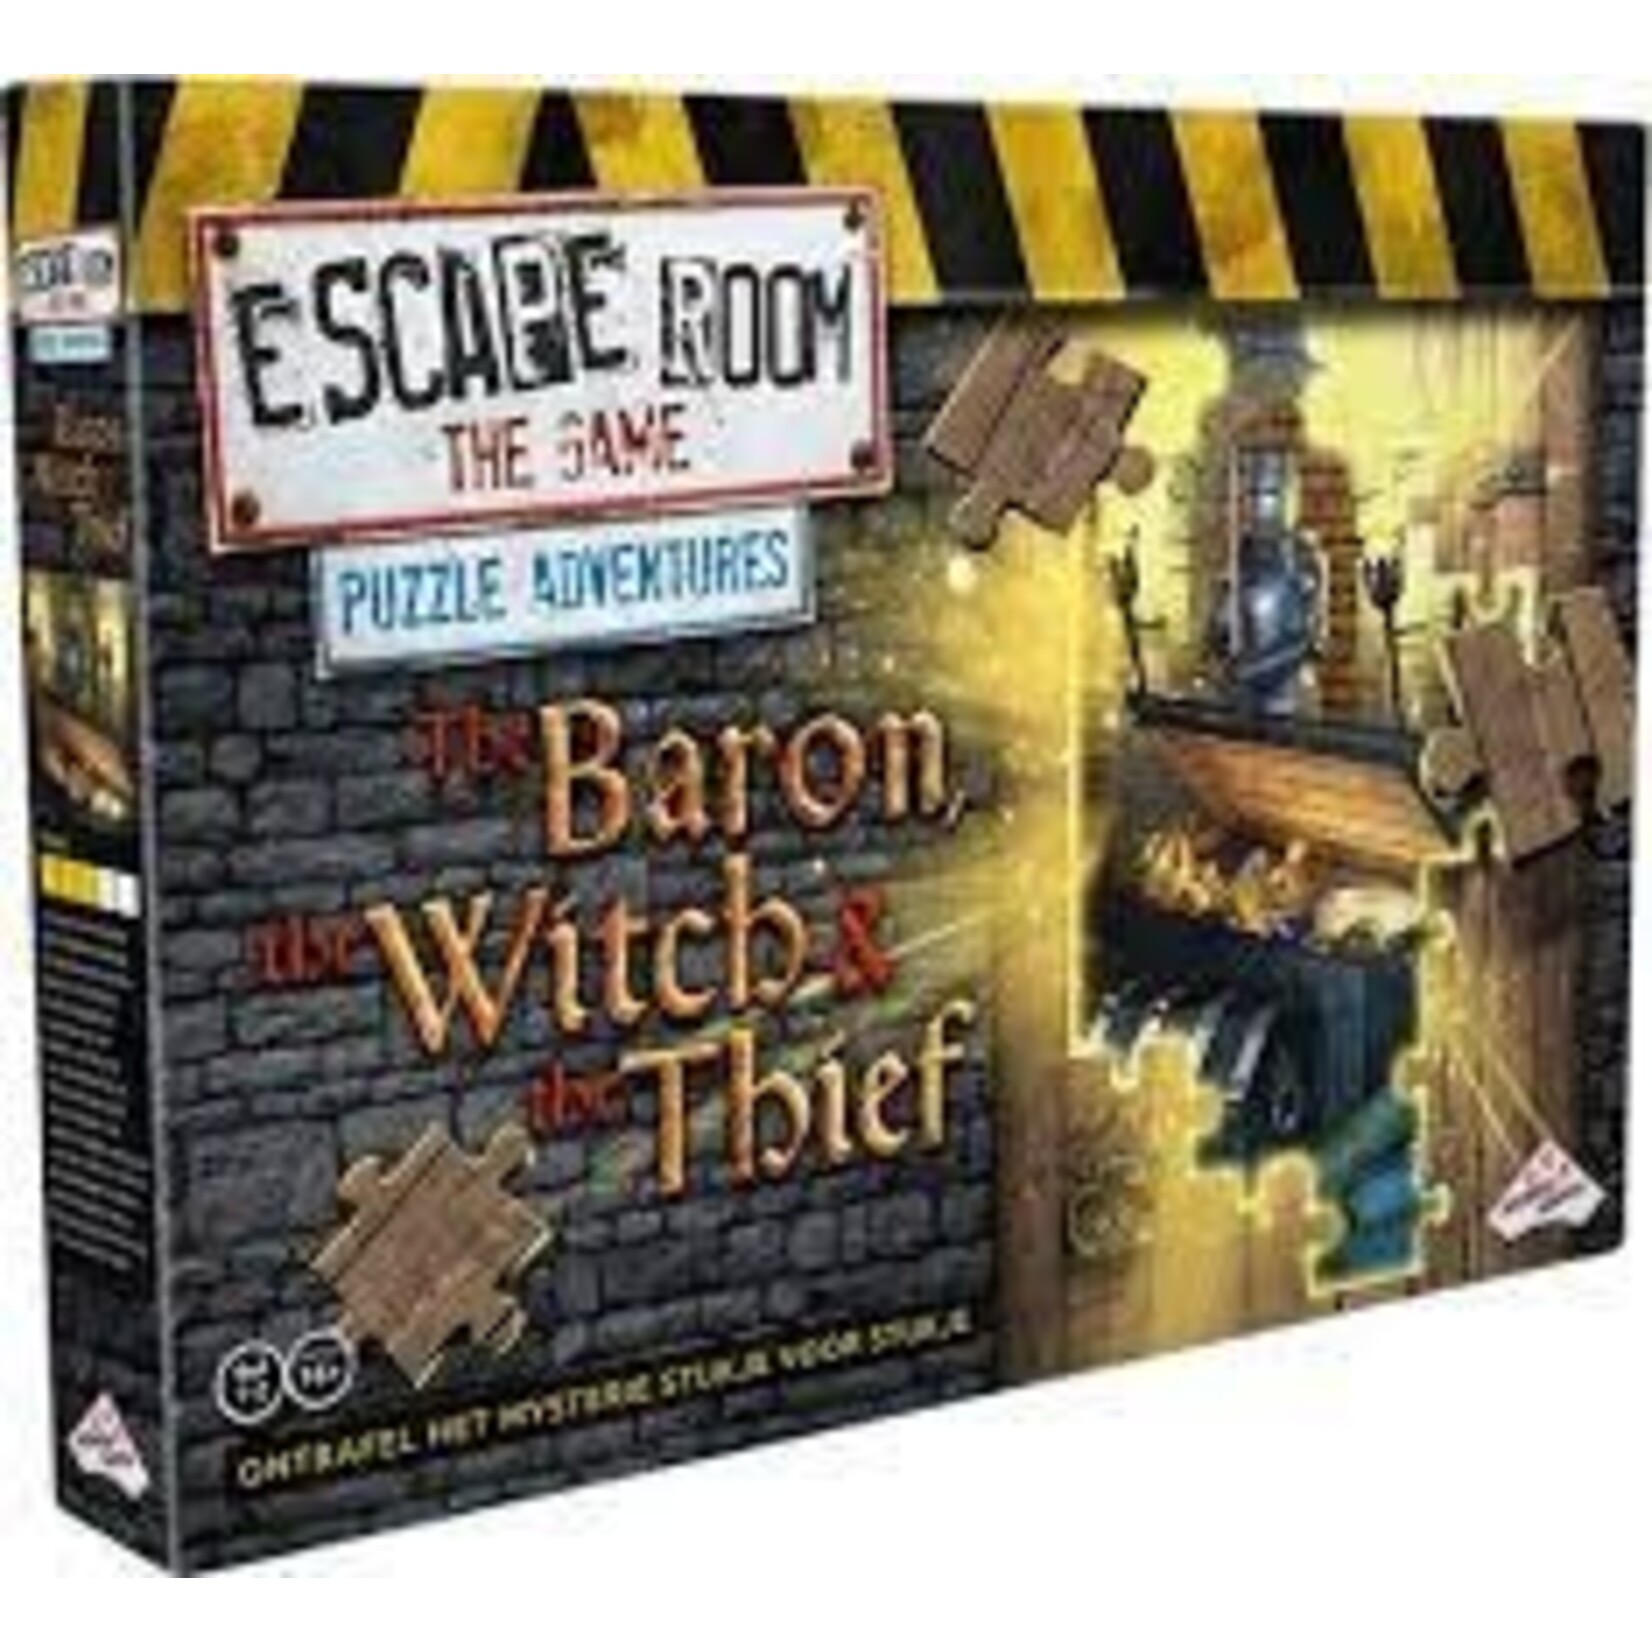 Identity Games Escape Room The Game Puzzle Adventures The Baron, The Witch & the Thief